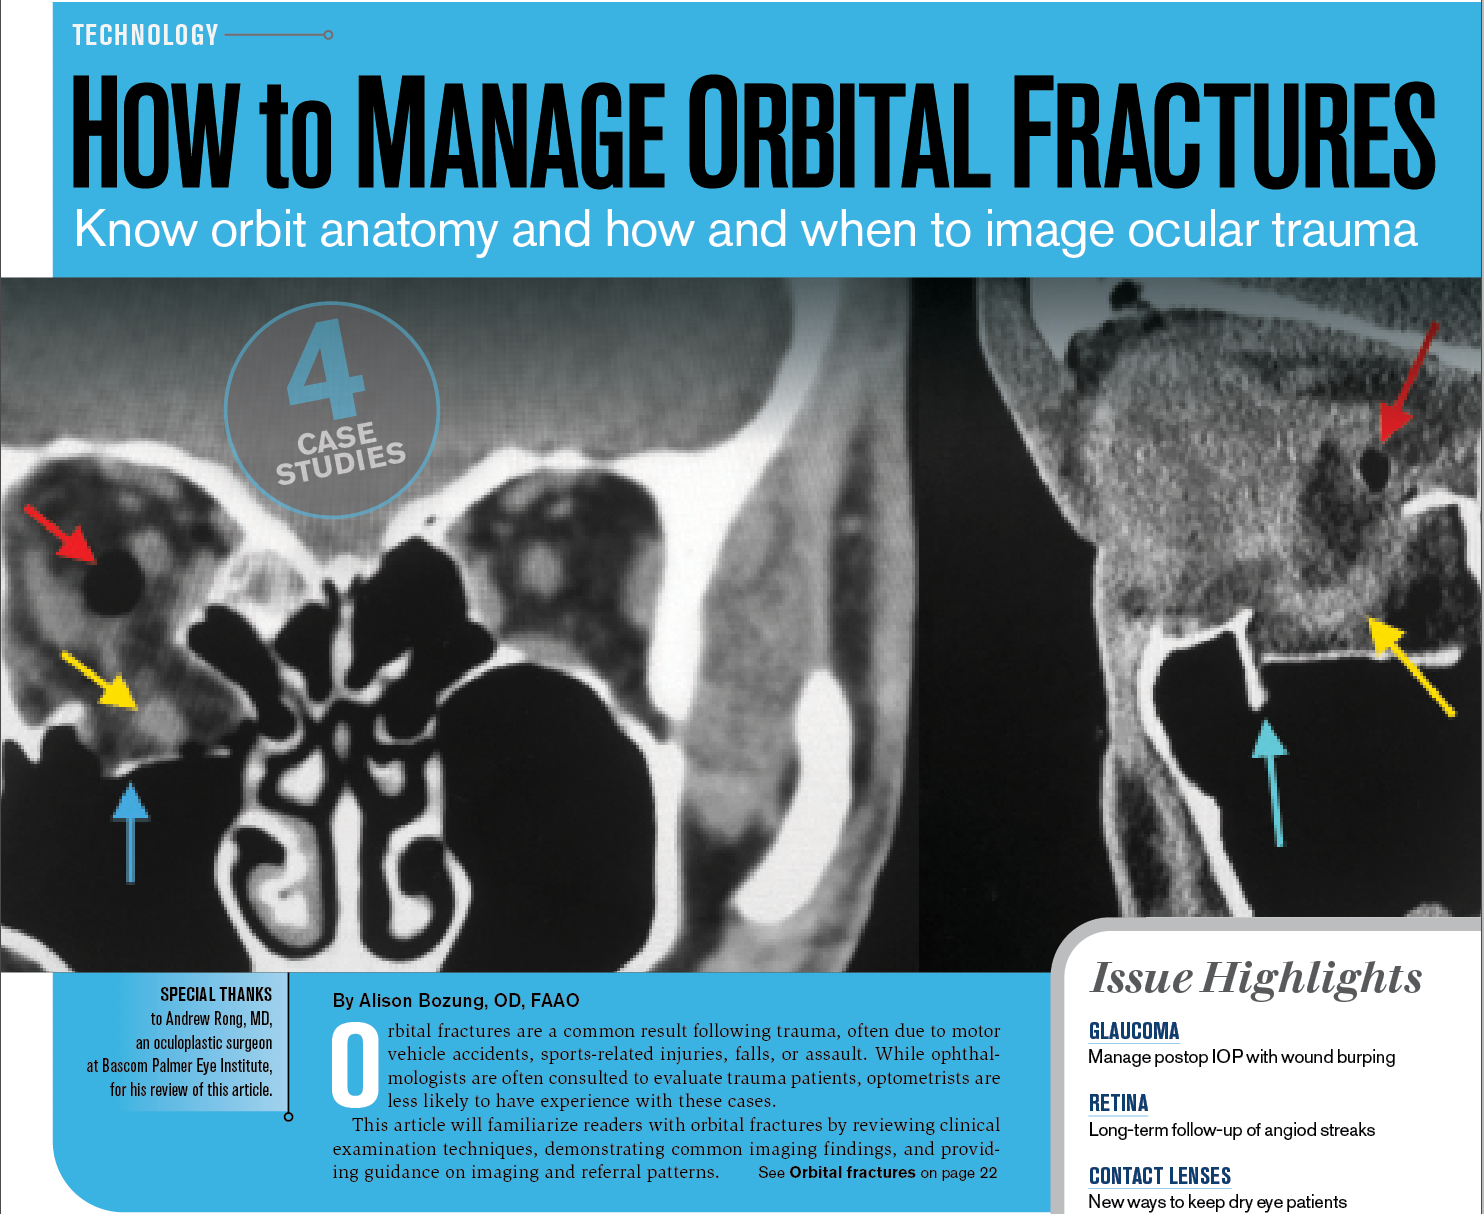 How to manage orbital fractures